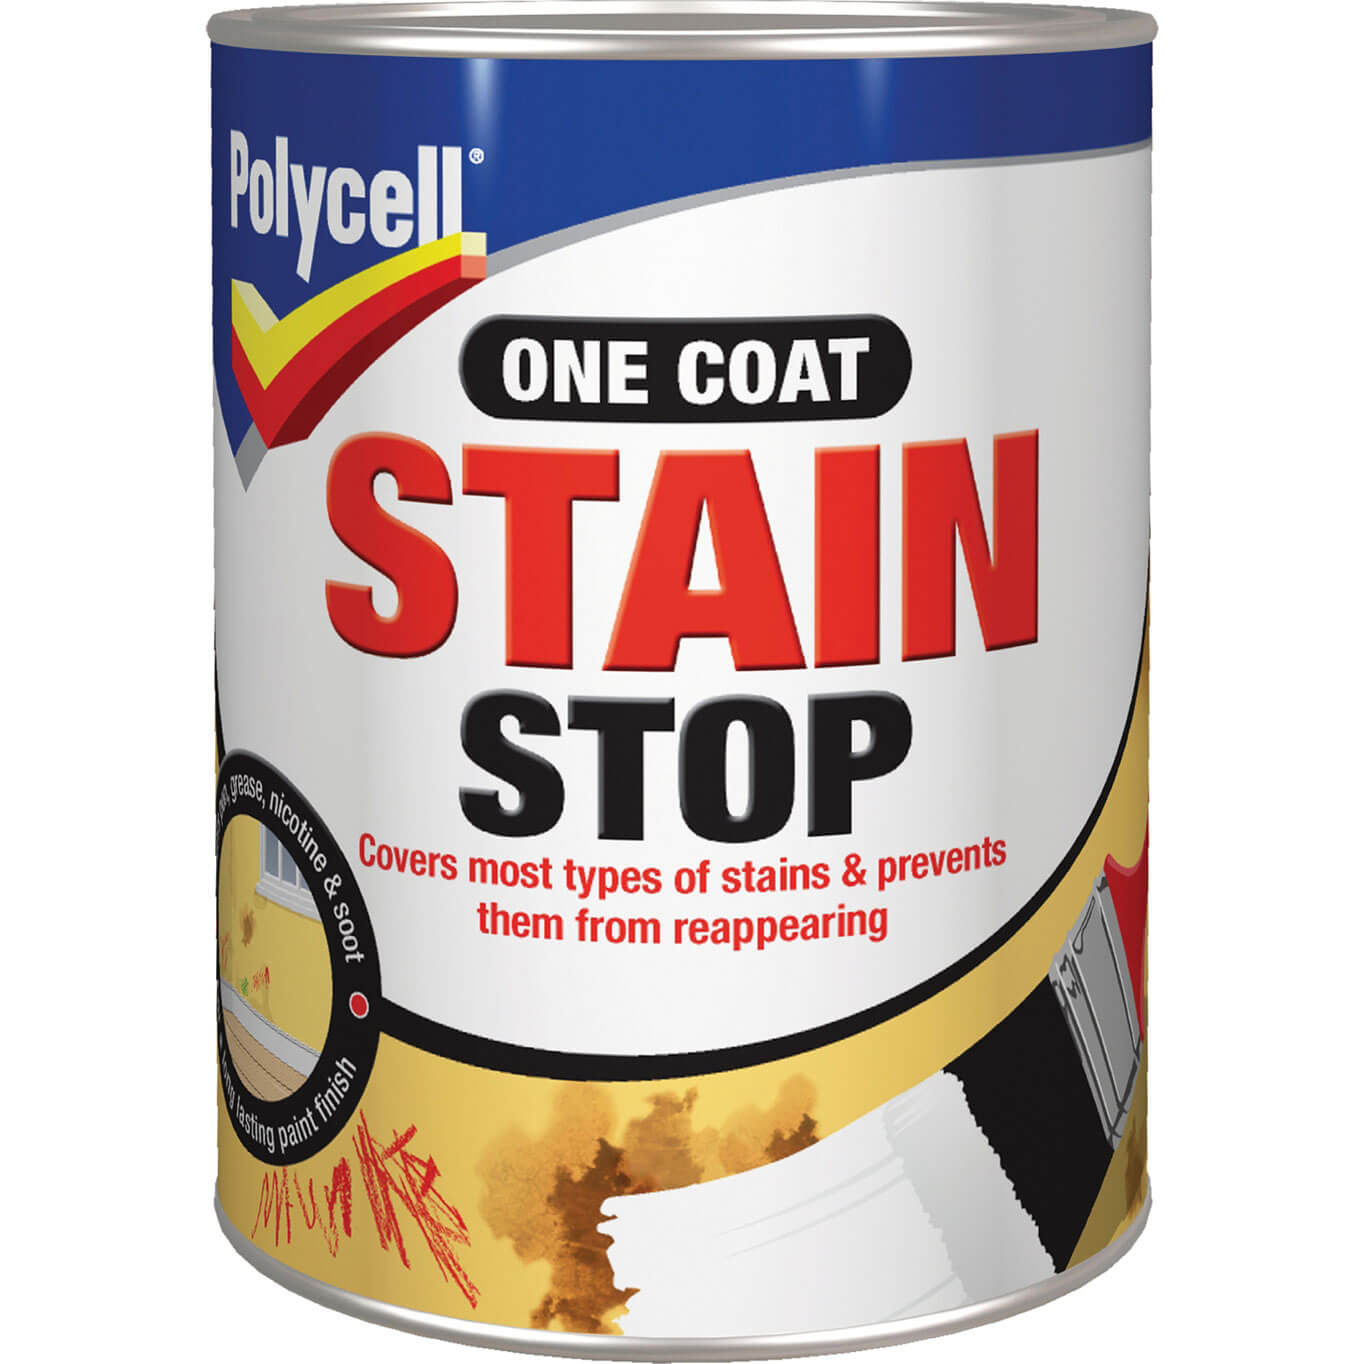 Polycell Stain Stop 1 Litre